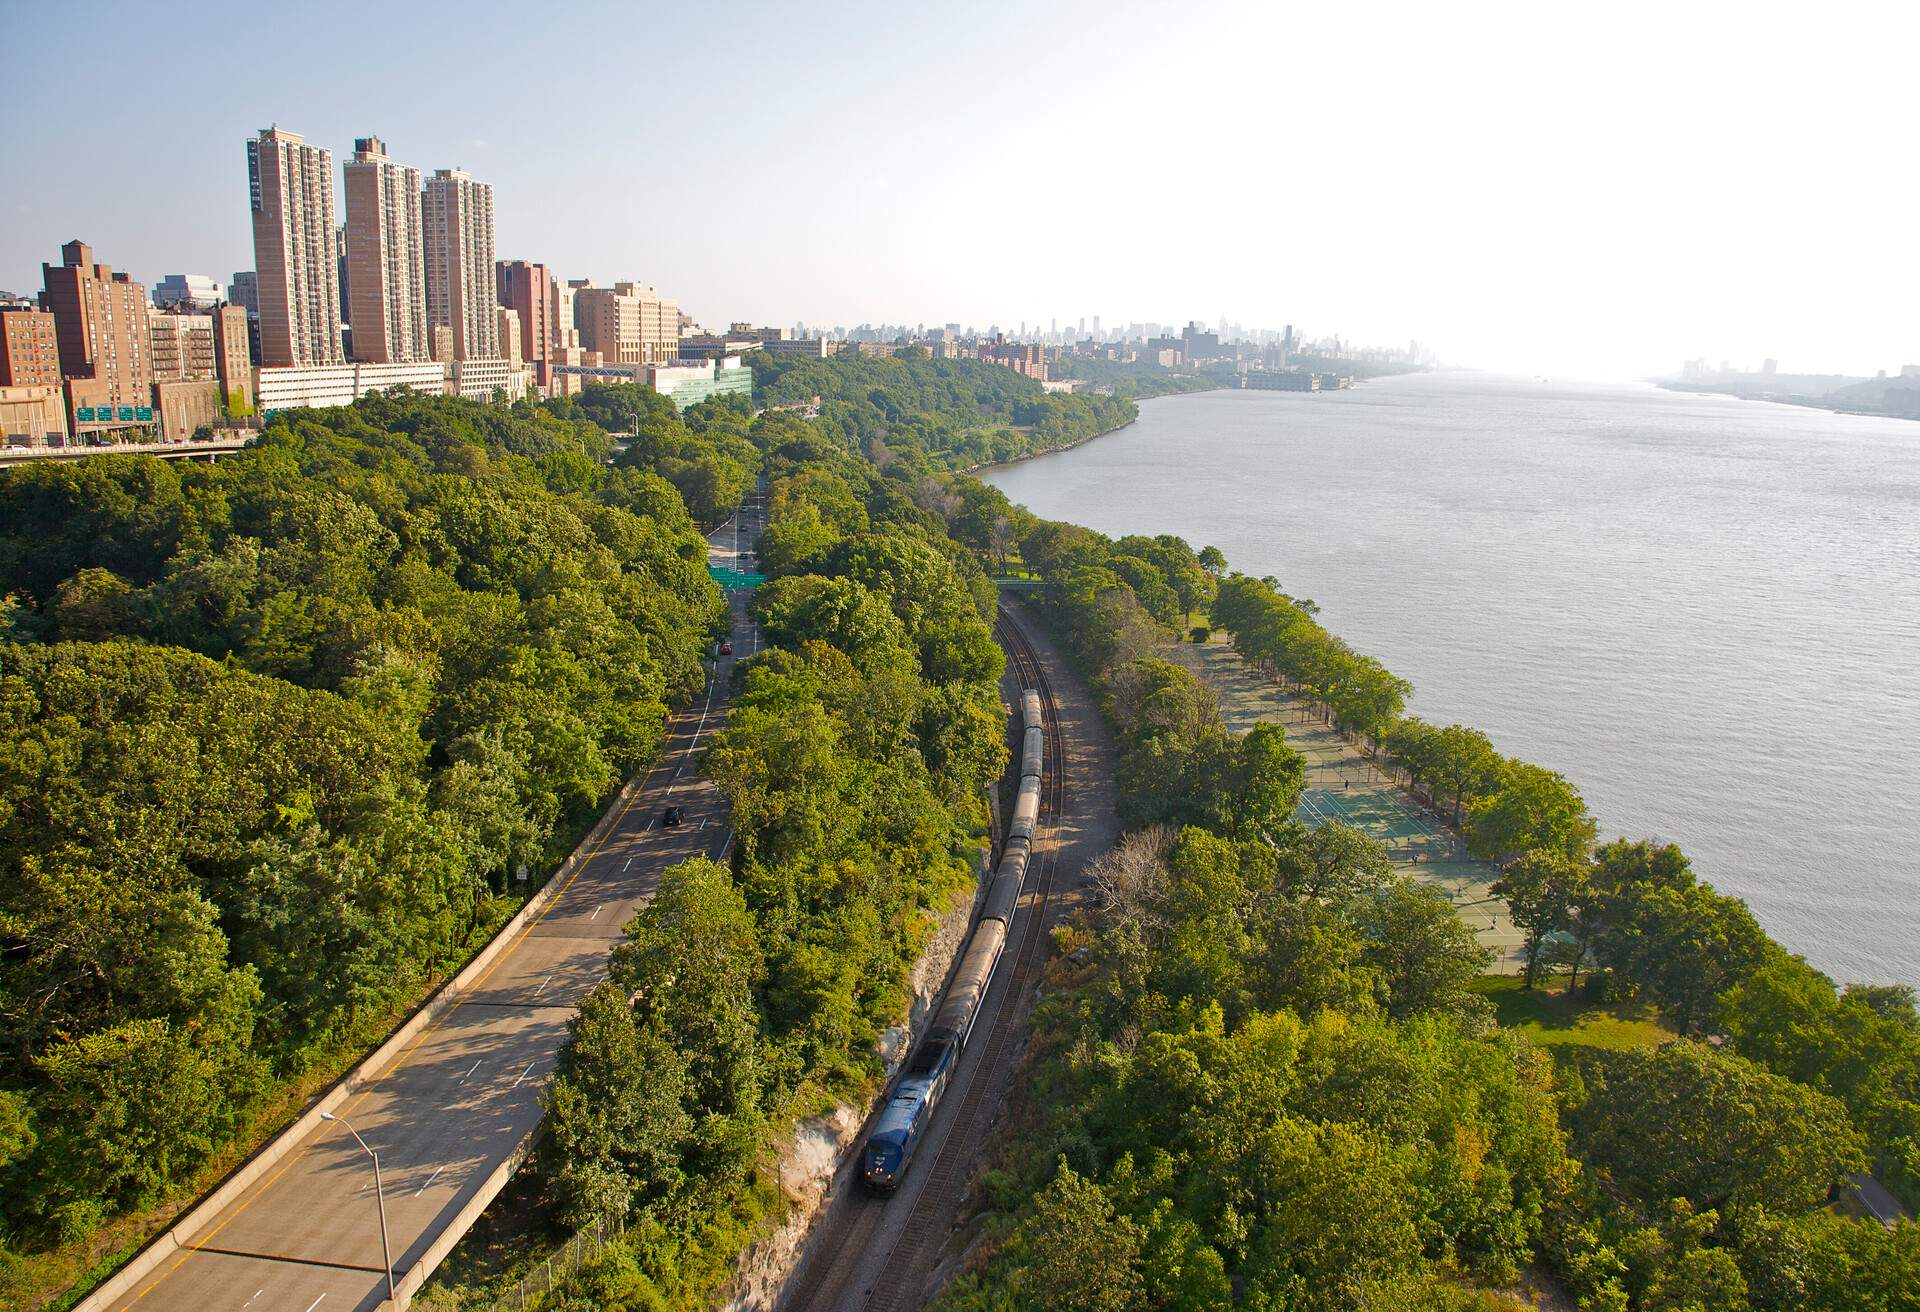 DEST_USA_NEW-YORK_NYC_Riverside_Park_GettyImages-128080705